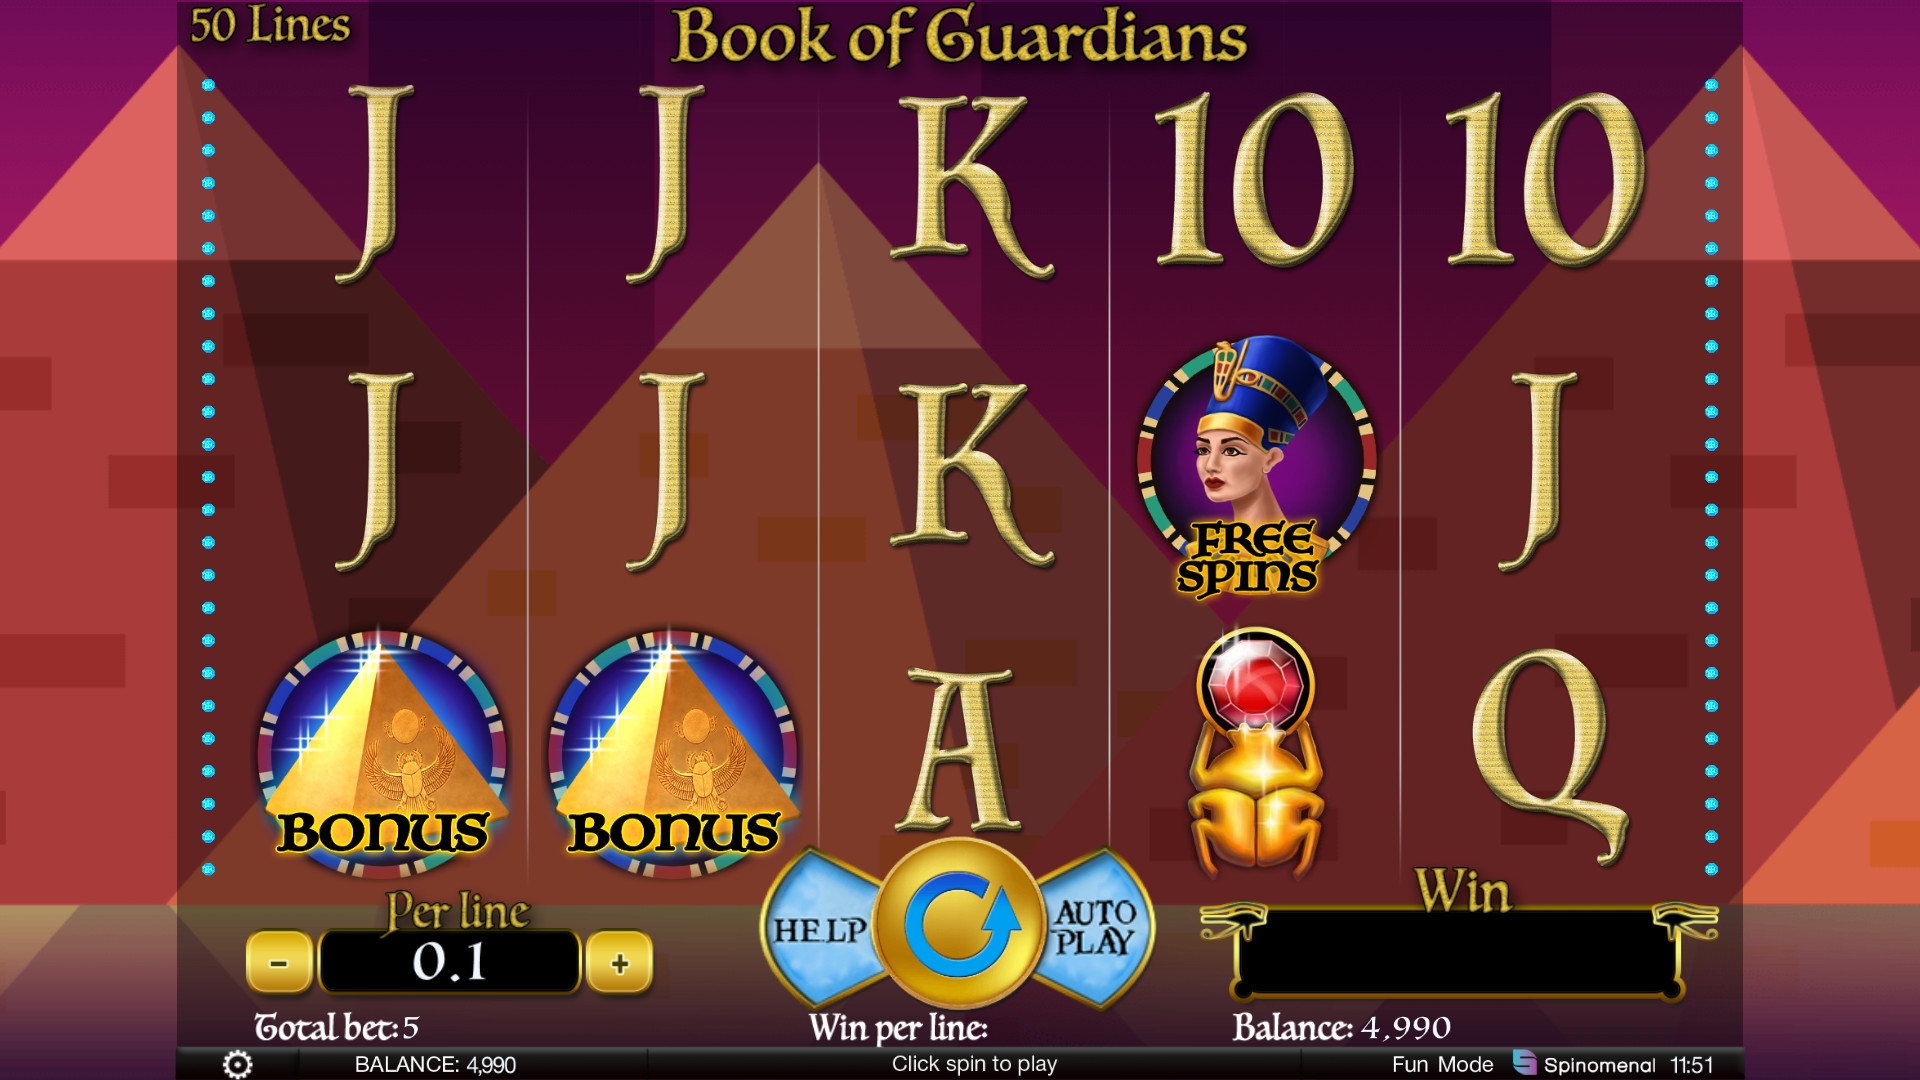 Book of Guardians (Book of Guardians) from category Slots